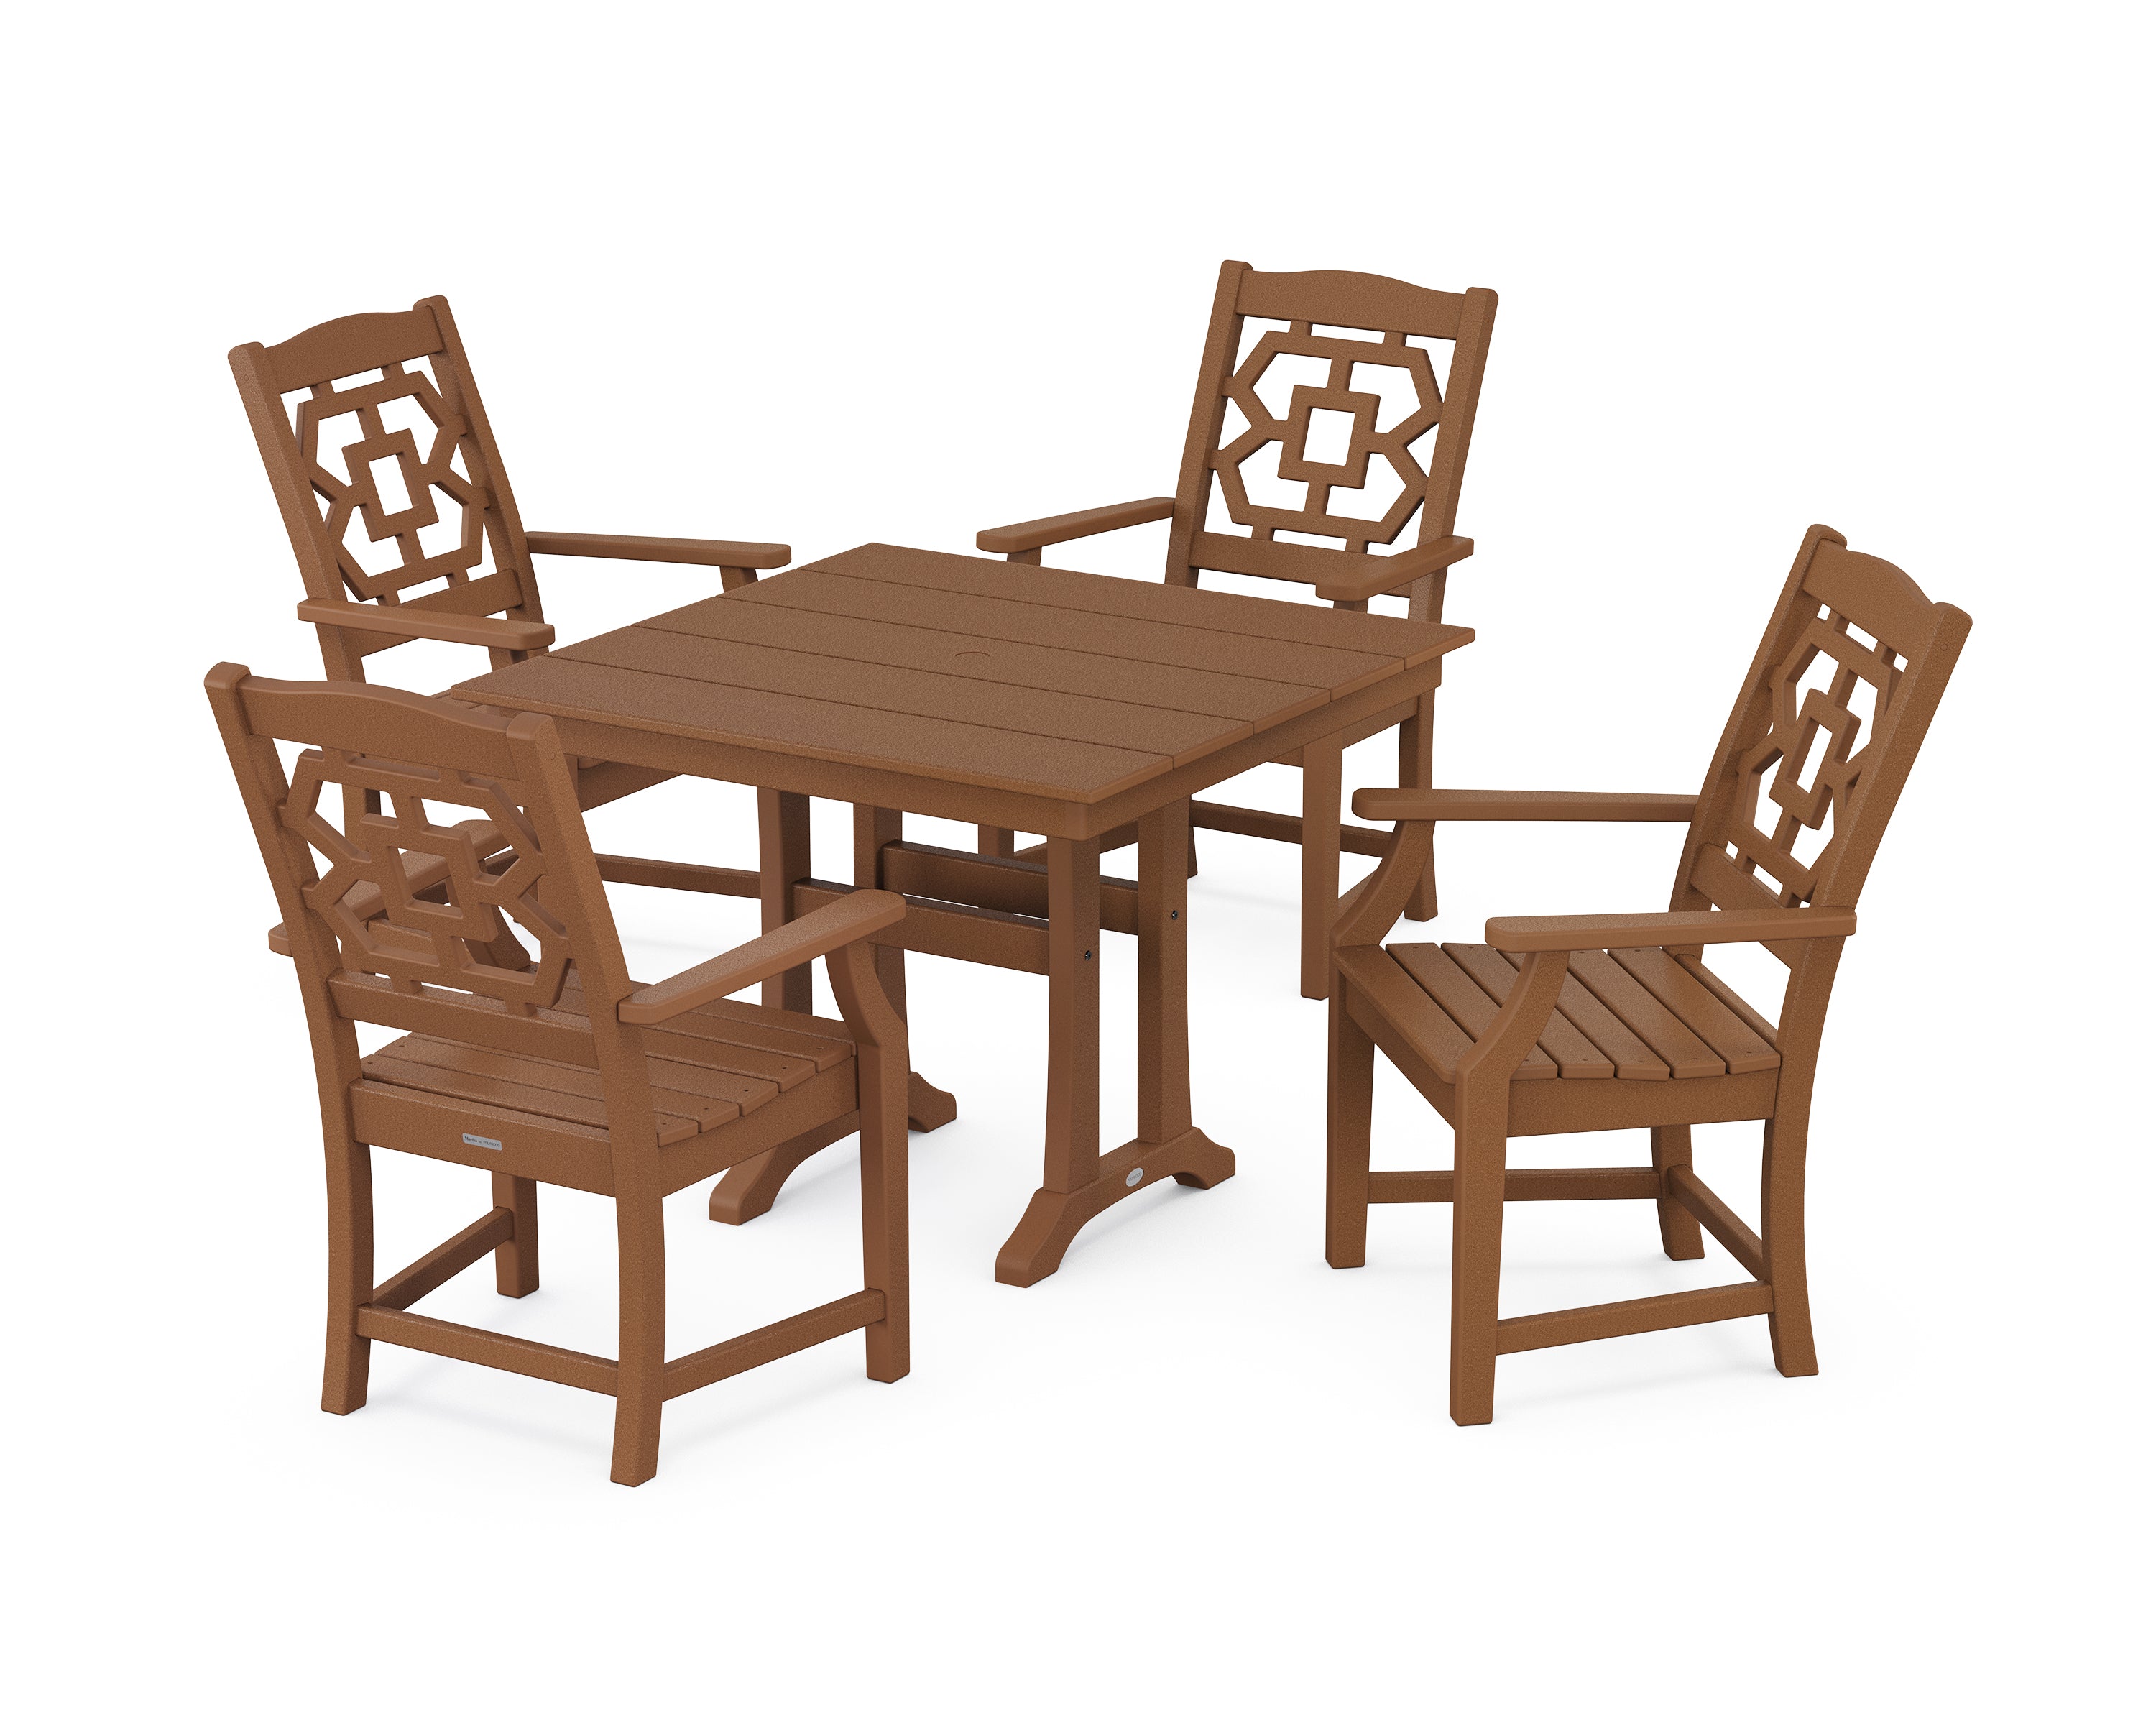 Martha Stewart by POLYWOOD® Chinoiserie 5-Piece Farmhouse Dining Set with Trestle Legs in Teak